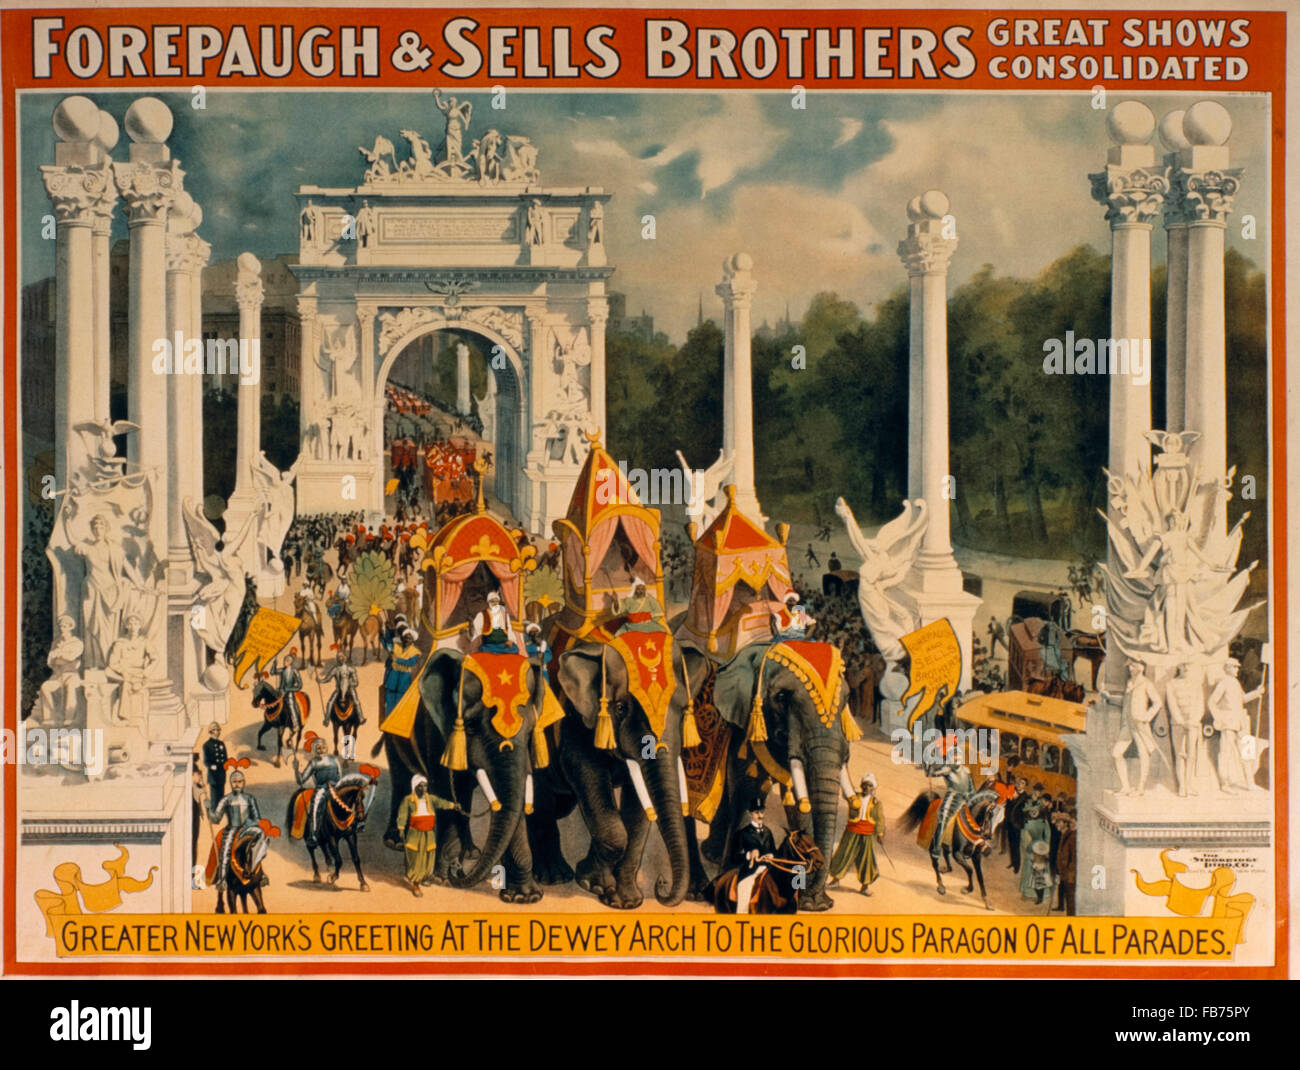 Forepaugh and Sells Brothers Great Shows Consolidated, Greater New York's Greeting at the Dewey Arch to the Glorious Paragon of All Parades, Circus Poster, circa 1900 Stock Photo